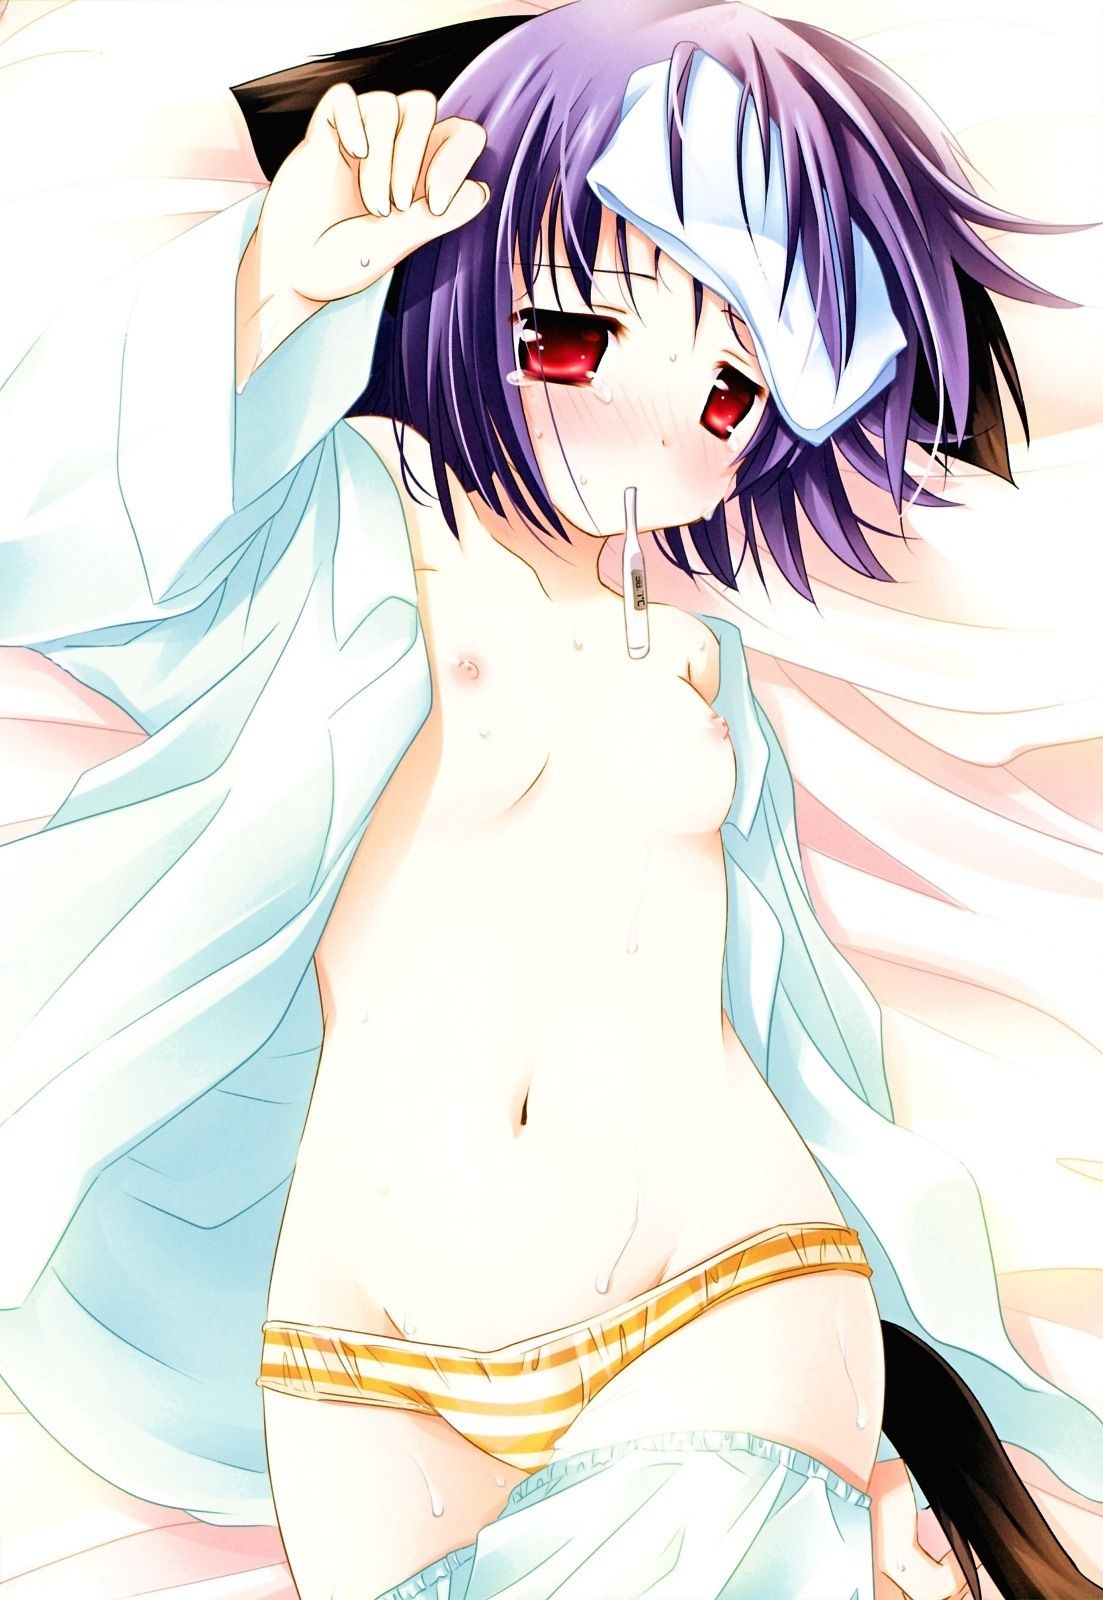 A cute two-dimensional erotic image of a poor milk loli girl for ladies and gentlemen who likes to be a little 40